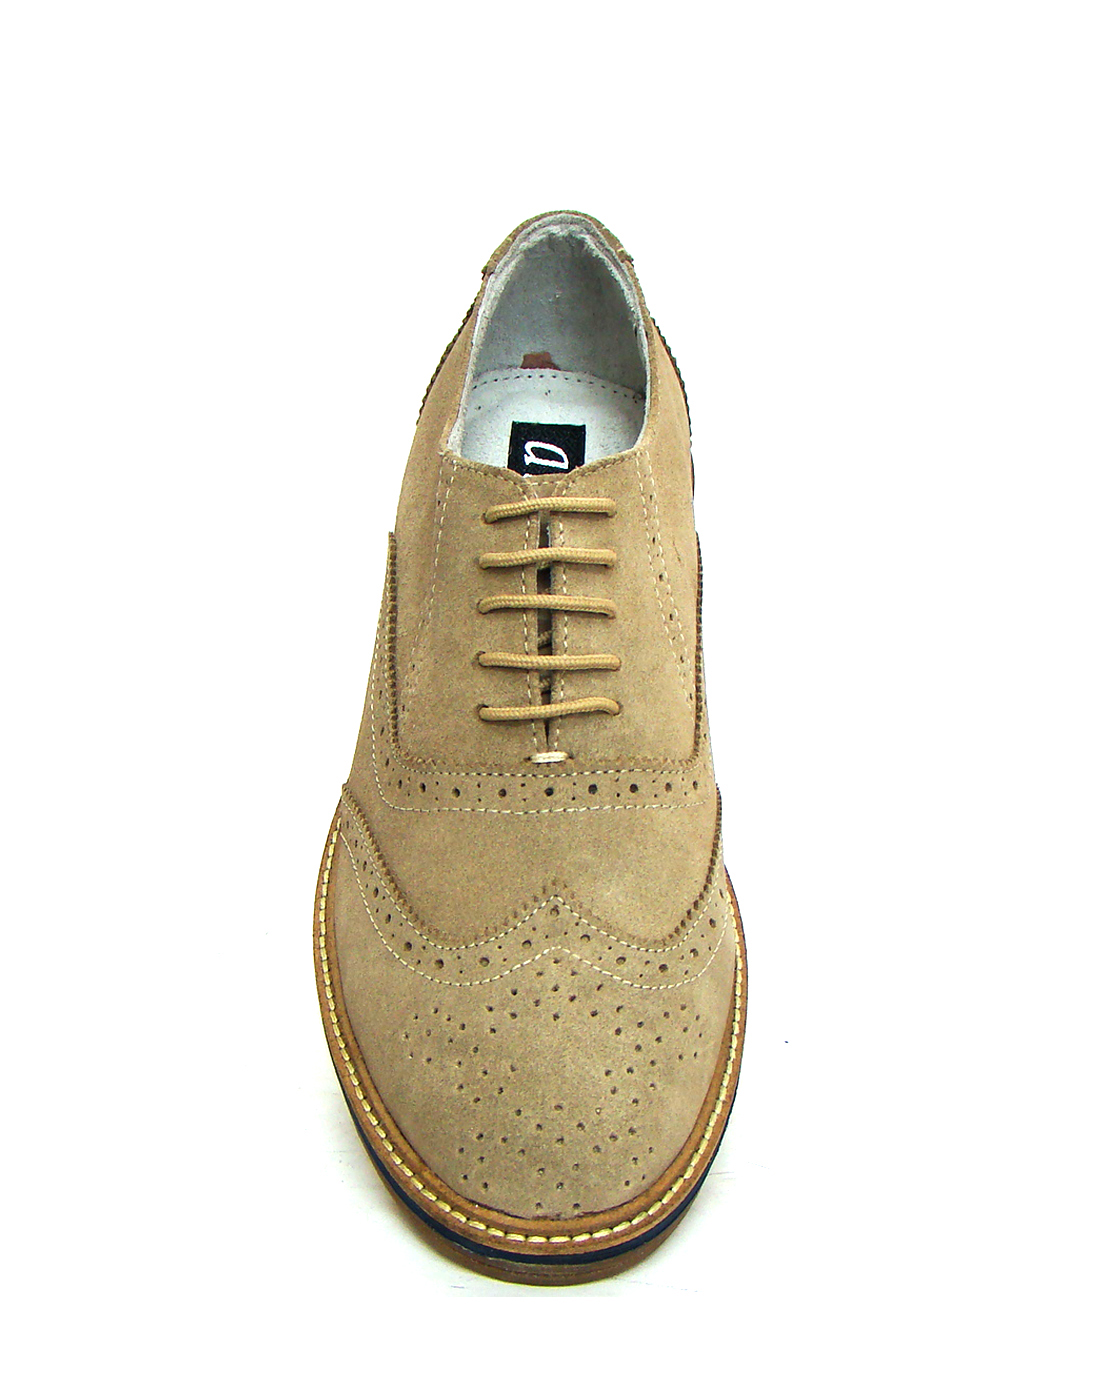 Beige Color Suede Leather Brogue Shoes with Handmade Sole. Size ...